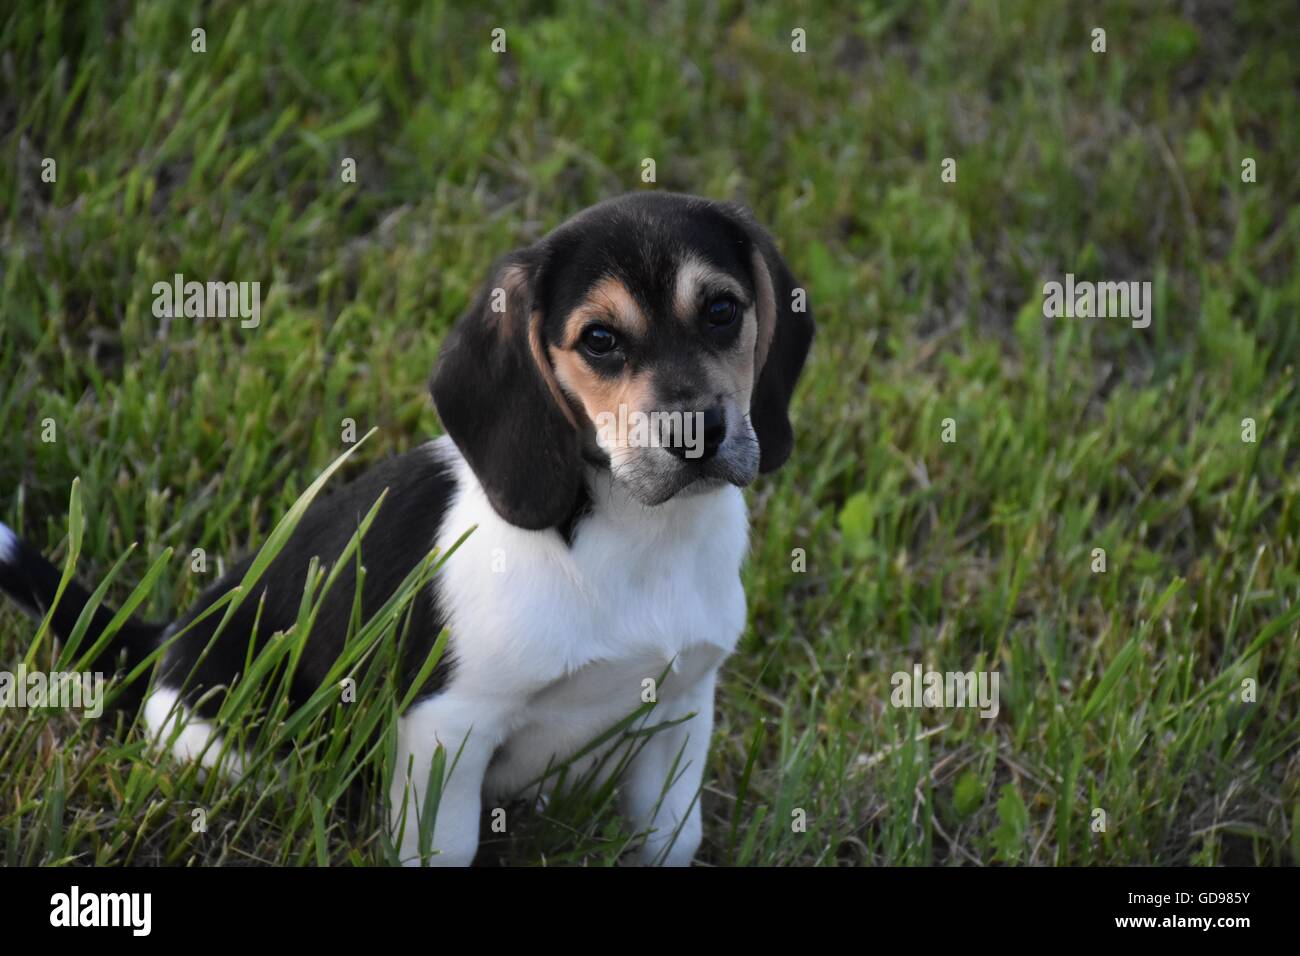 Beagle Puppy Sitting in Grass Stock Photo